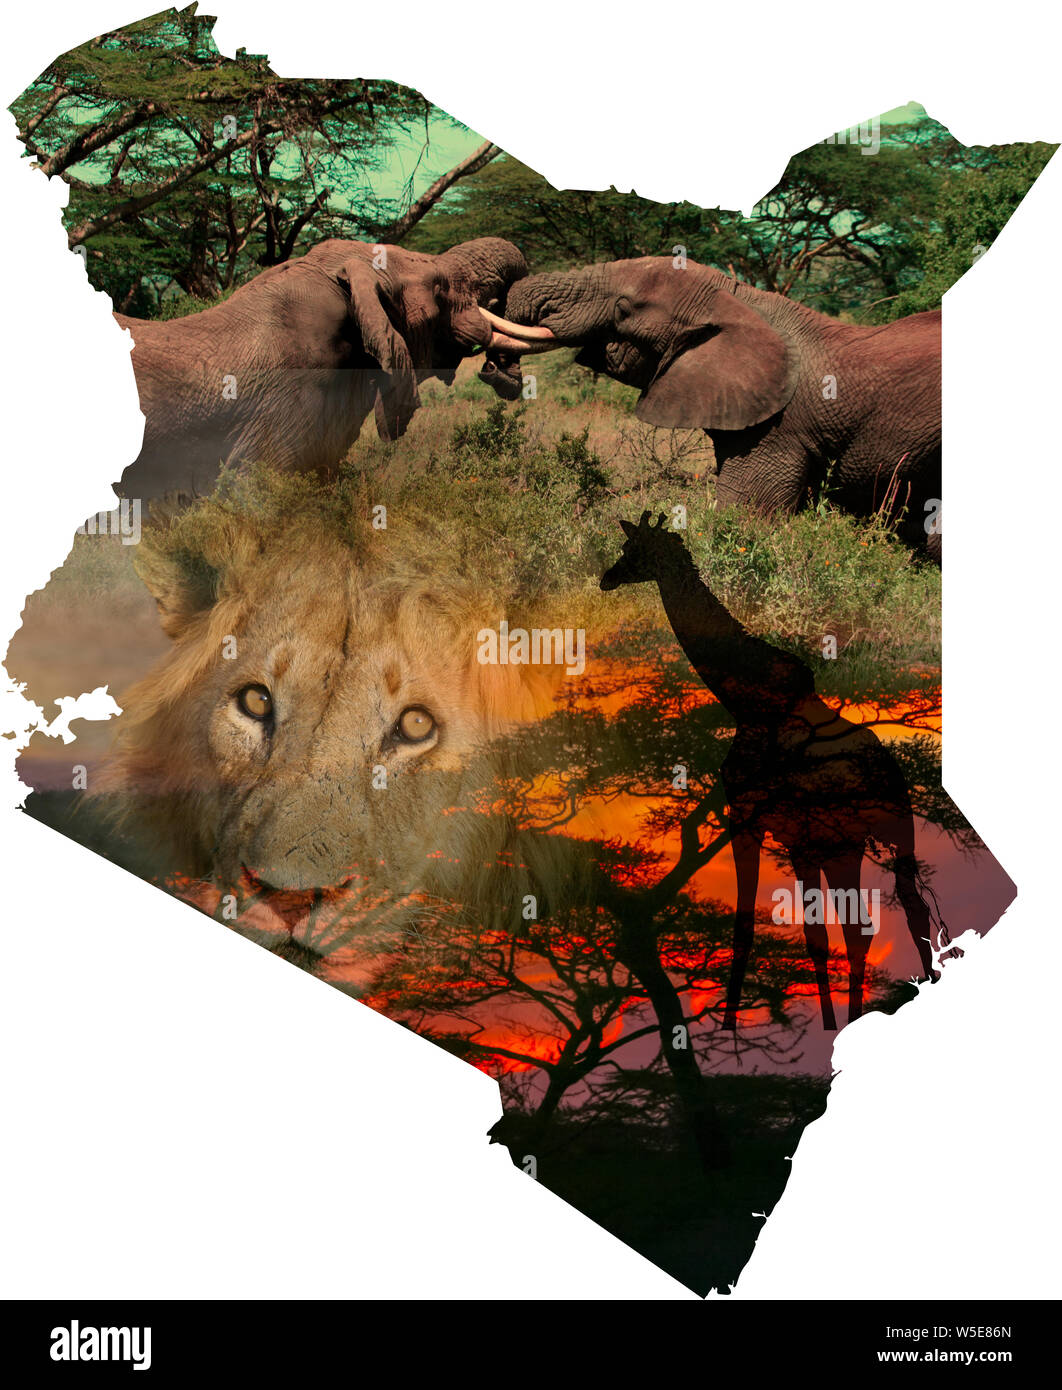 Digitally enhanced image of a Map of Kenya collage with local images of wildlife and scenery Stock Photo